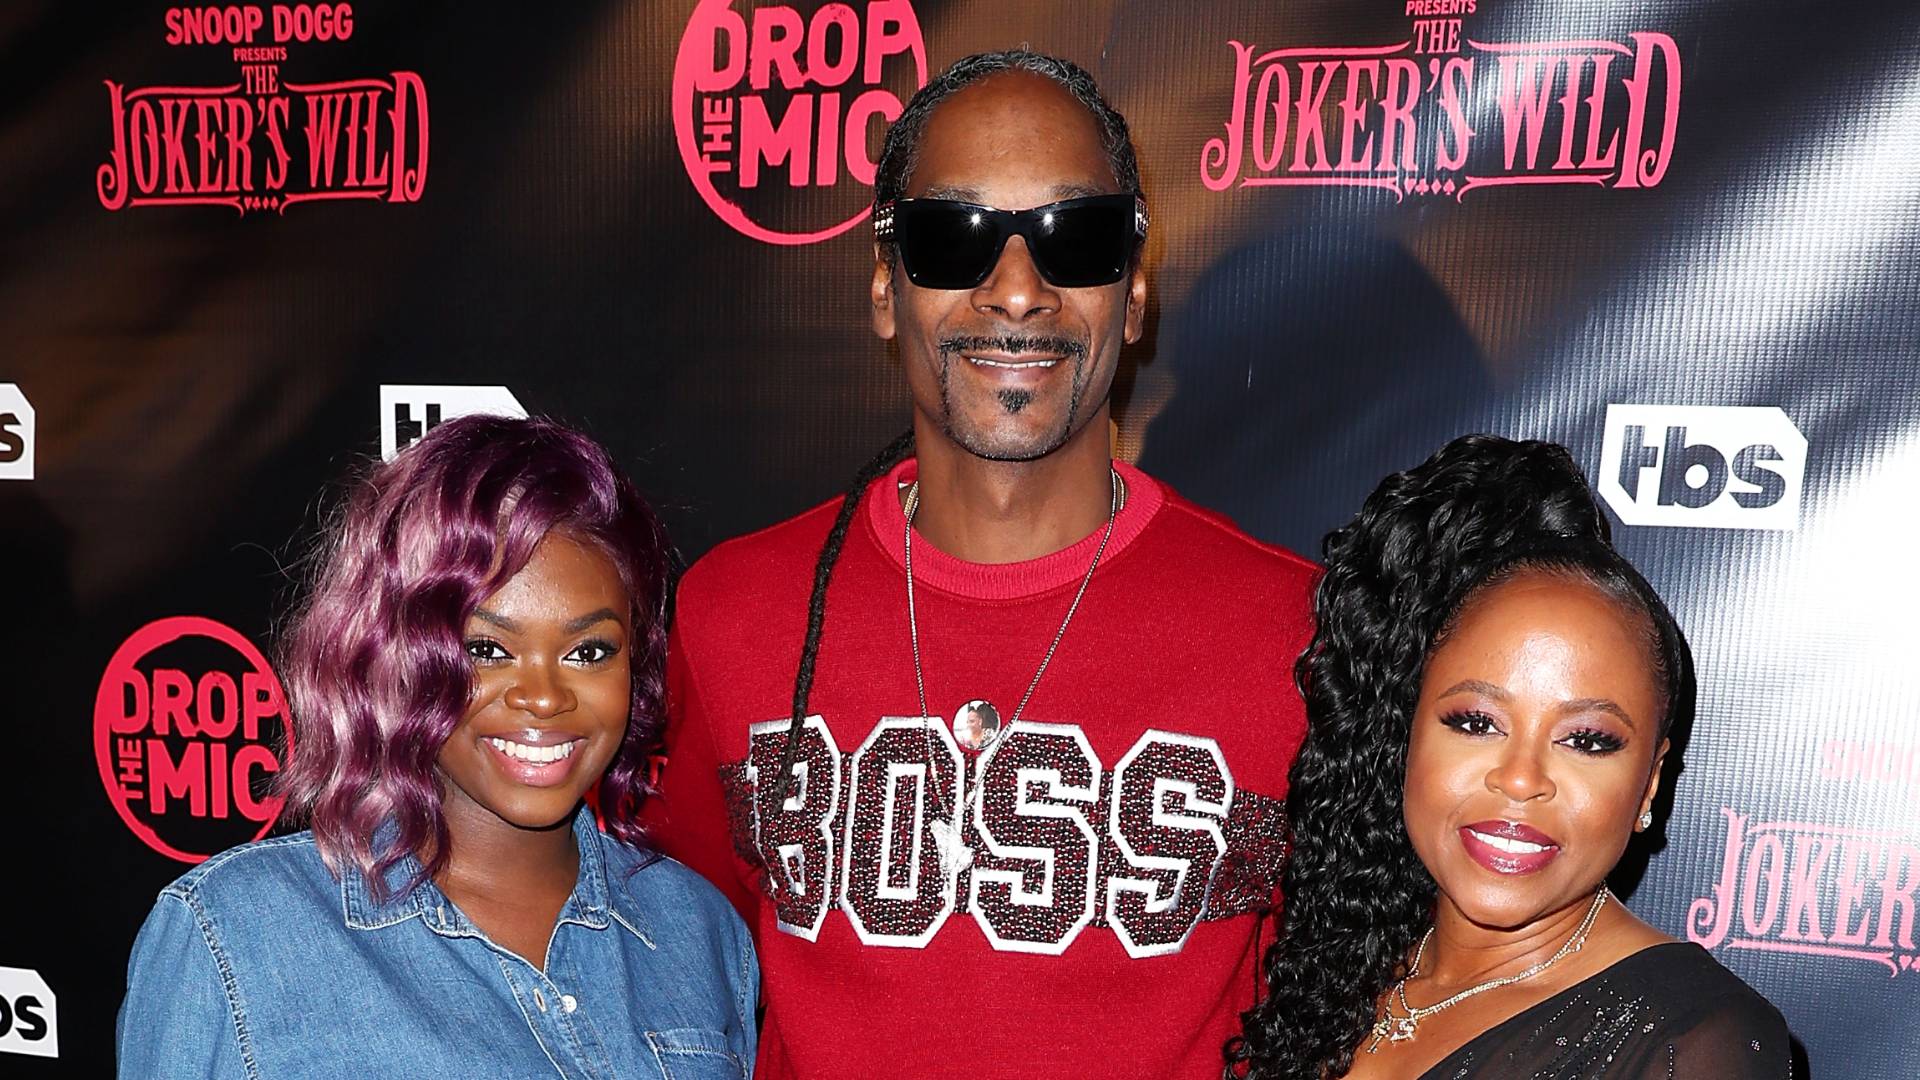 Cori Broadus, Host Snoop Dogg (L) and Shante Broadus arrive at the Premiere for TBS's "Drop The Mic" and "The Joker's Wild" at The Highlight Room on October 11, 2017 in Los Angeles, California. 